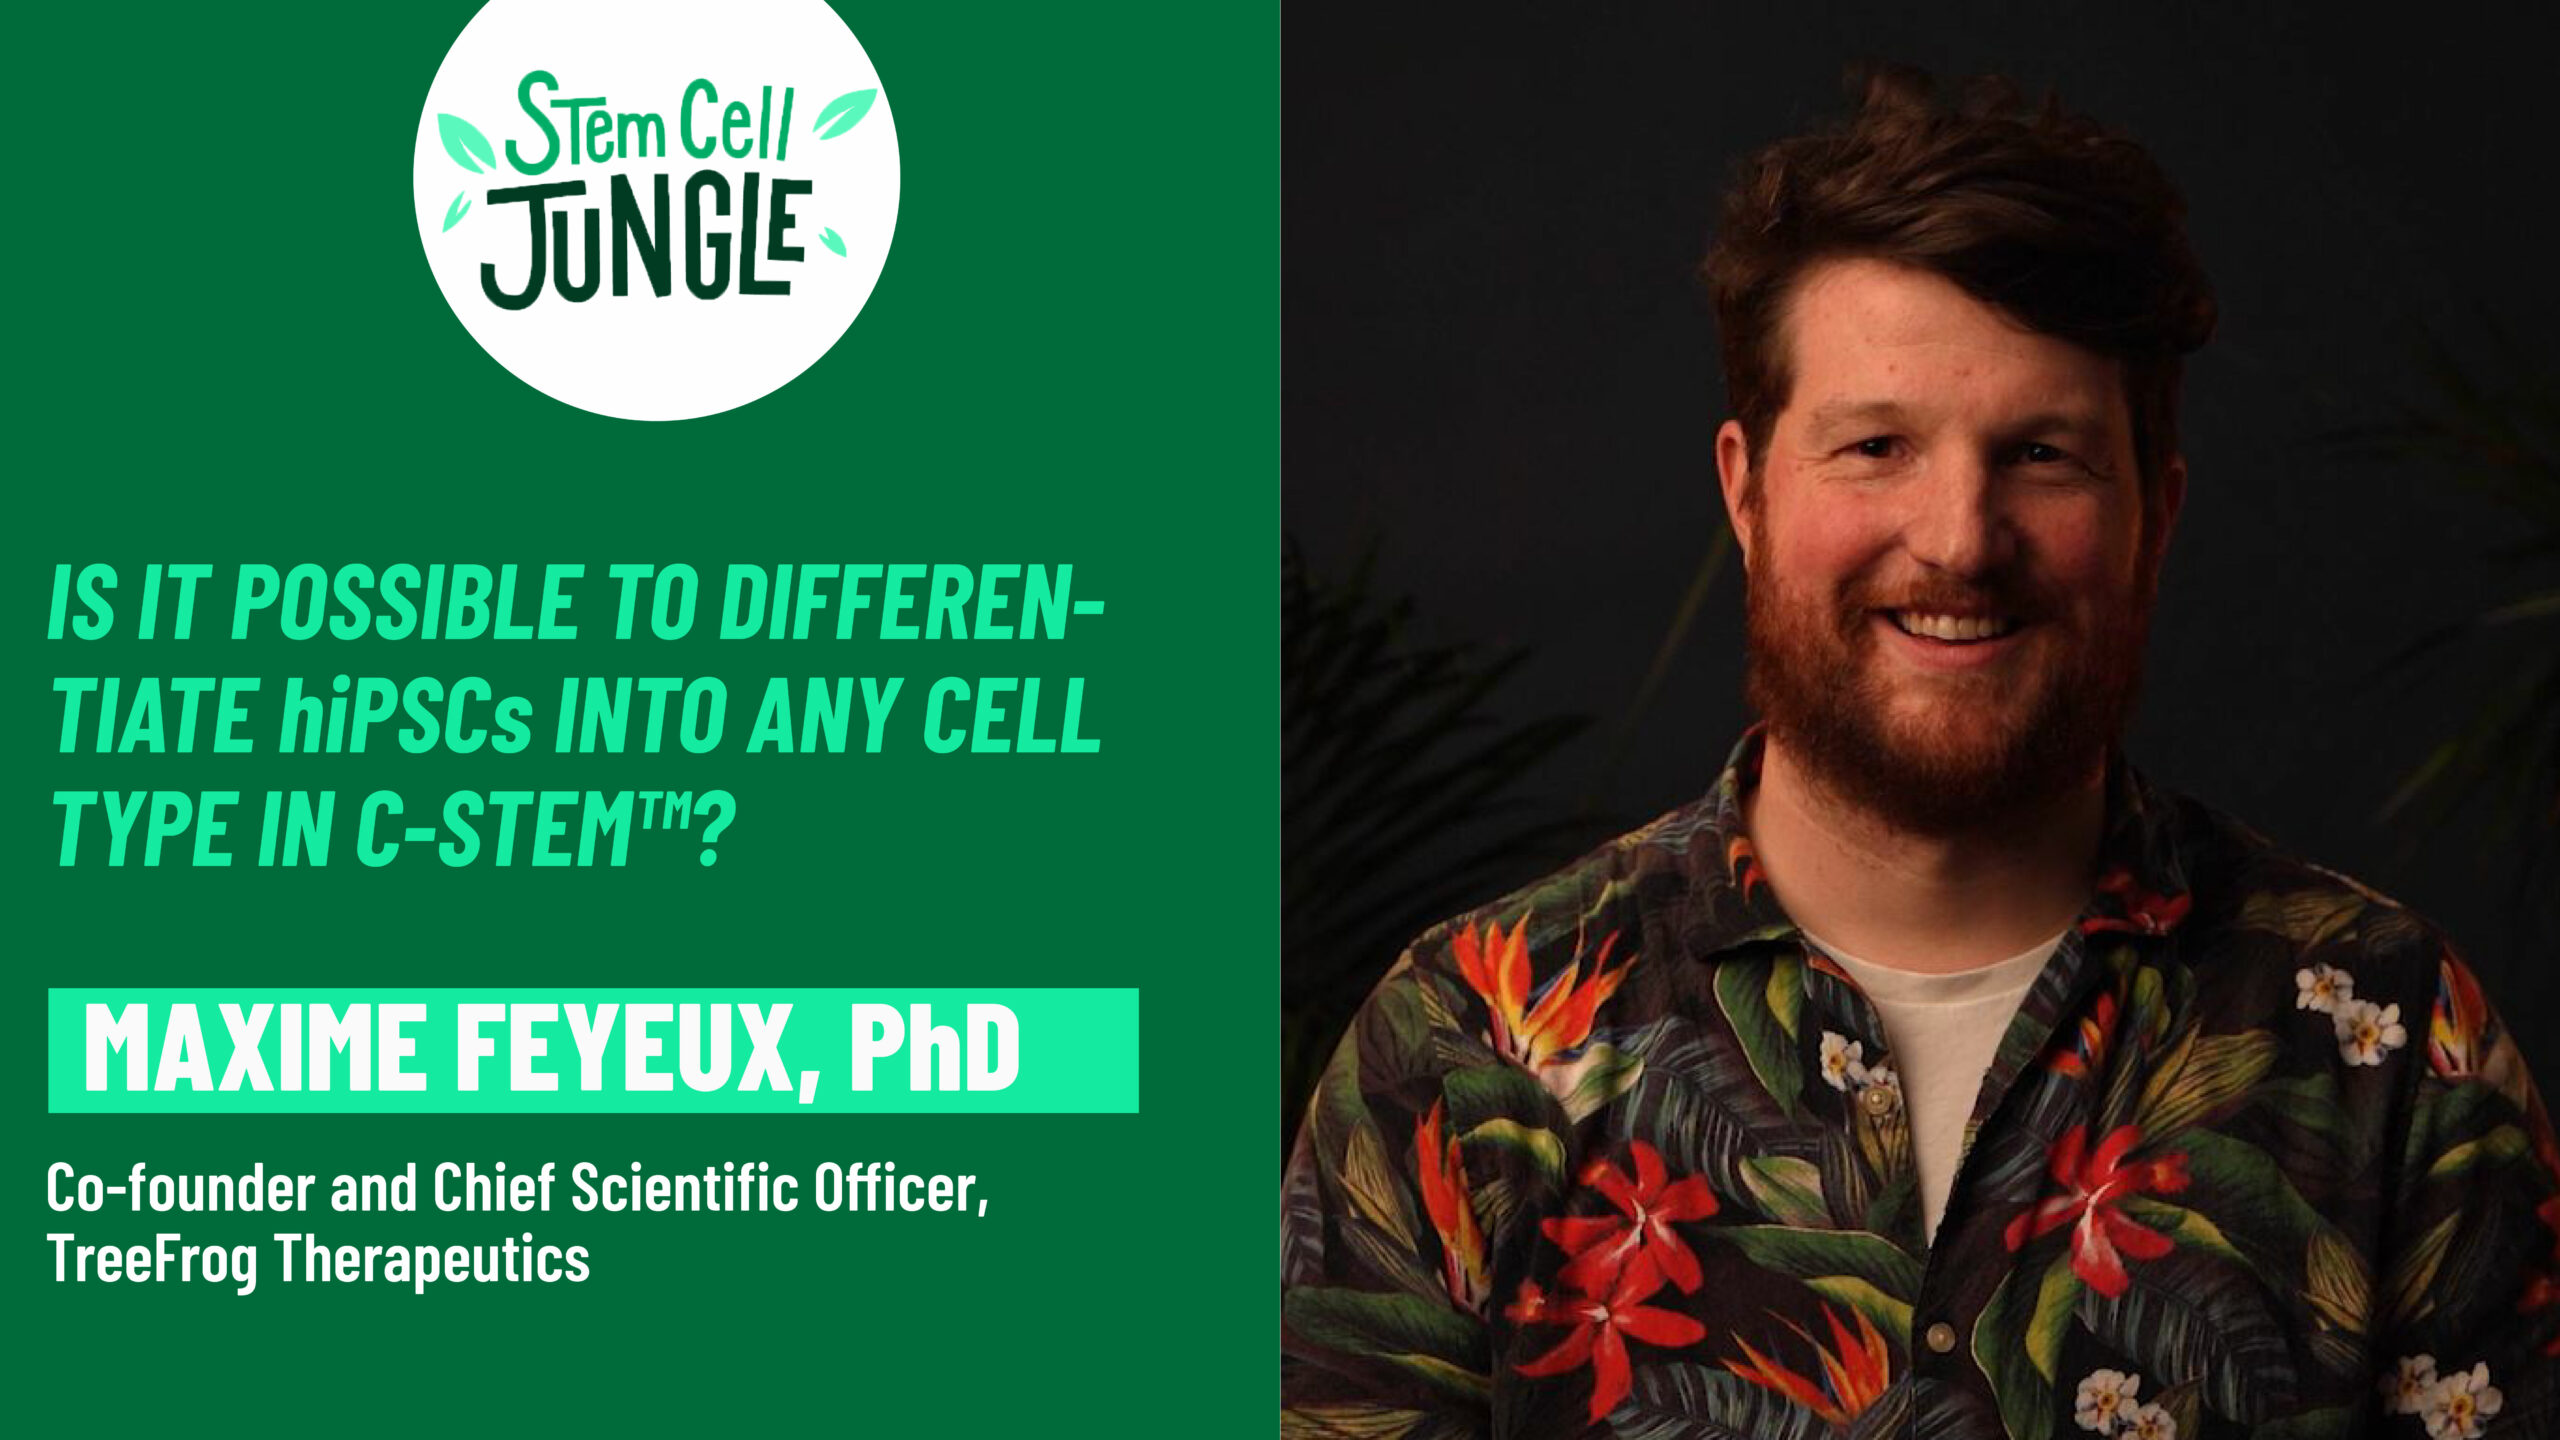 Is it possible to differentiate hiPSCs into any cell type in C-Stem™?